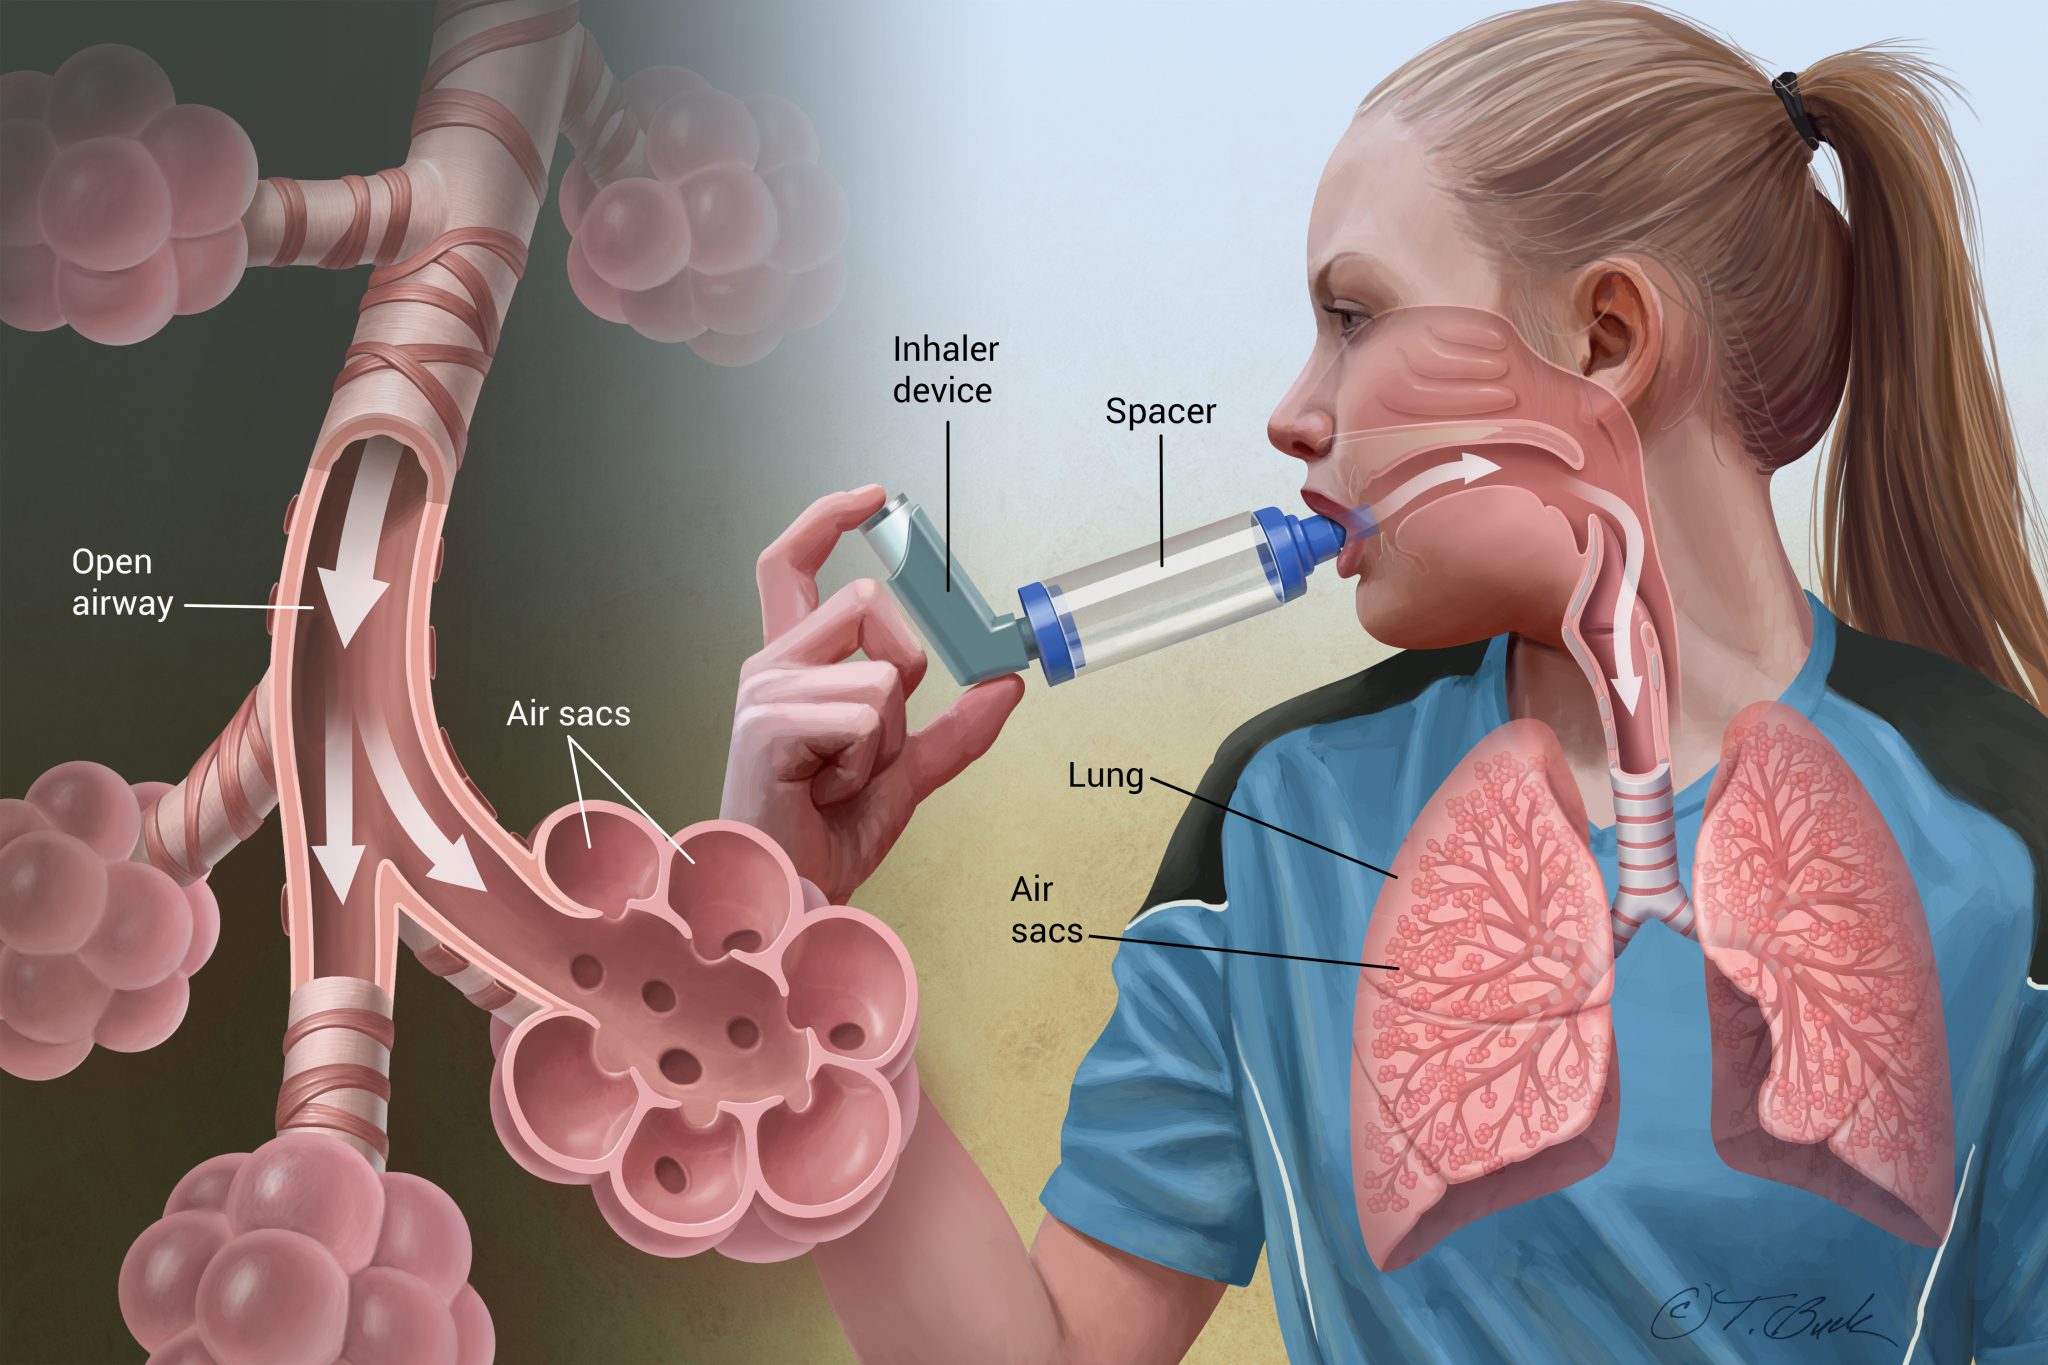 Asthma - To avoid shortness of breath, take special care of these things